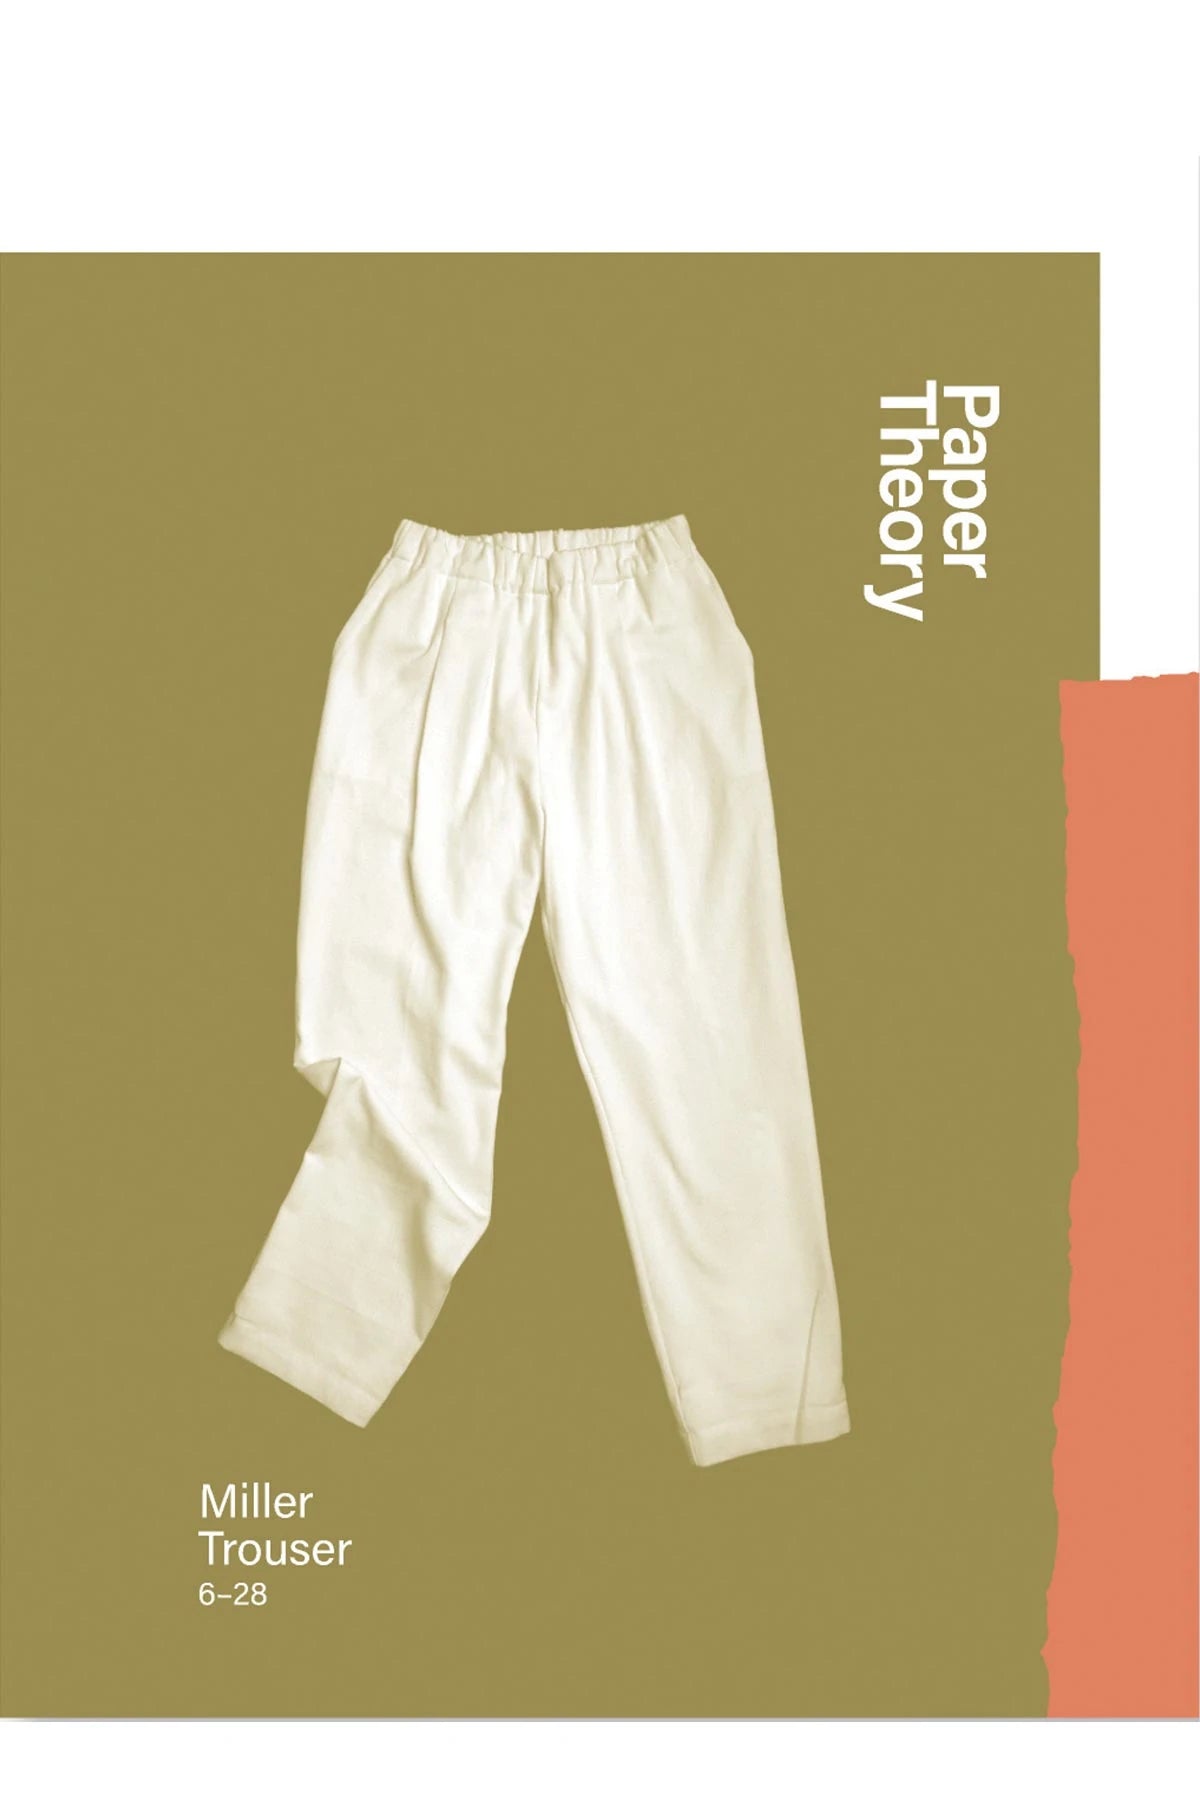 Miller Trouser - Paper pattern - Paper Theory